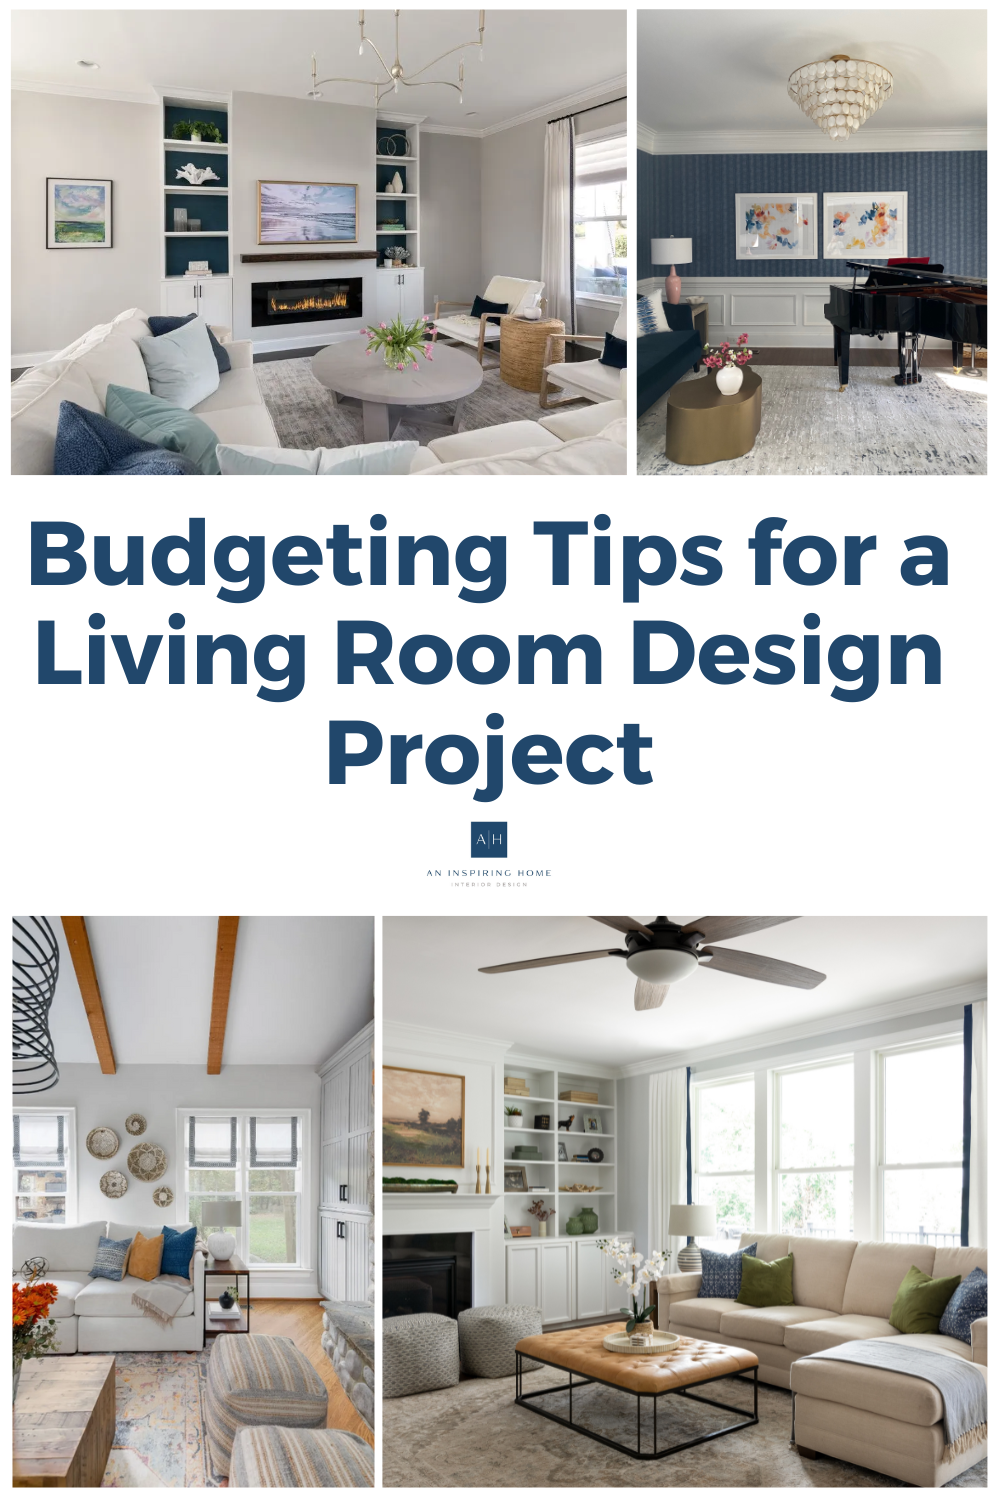 Budgeting Tips for a Living Room Design Project